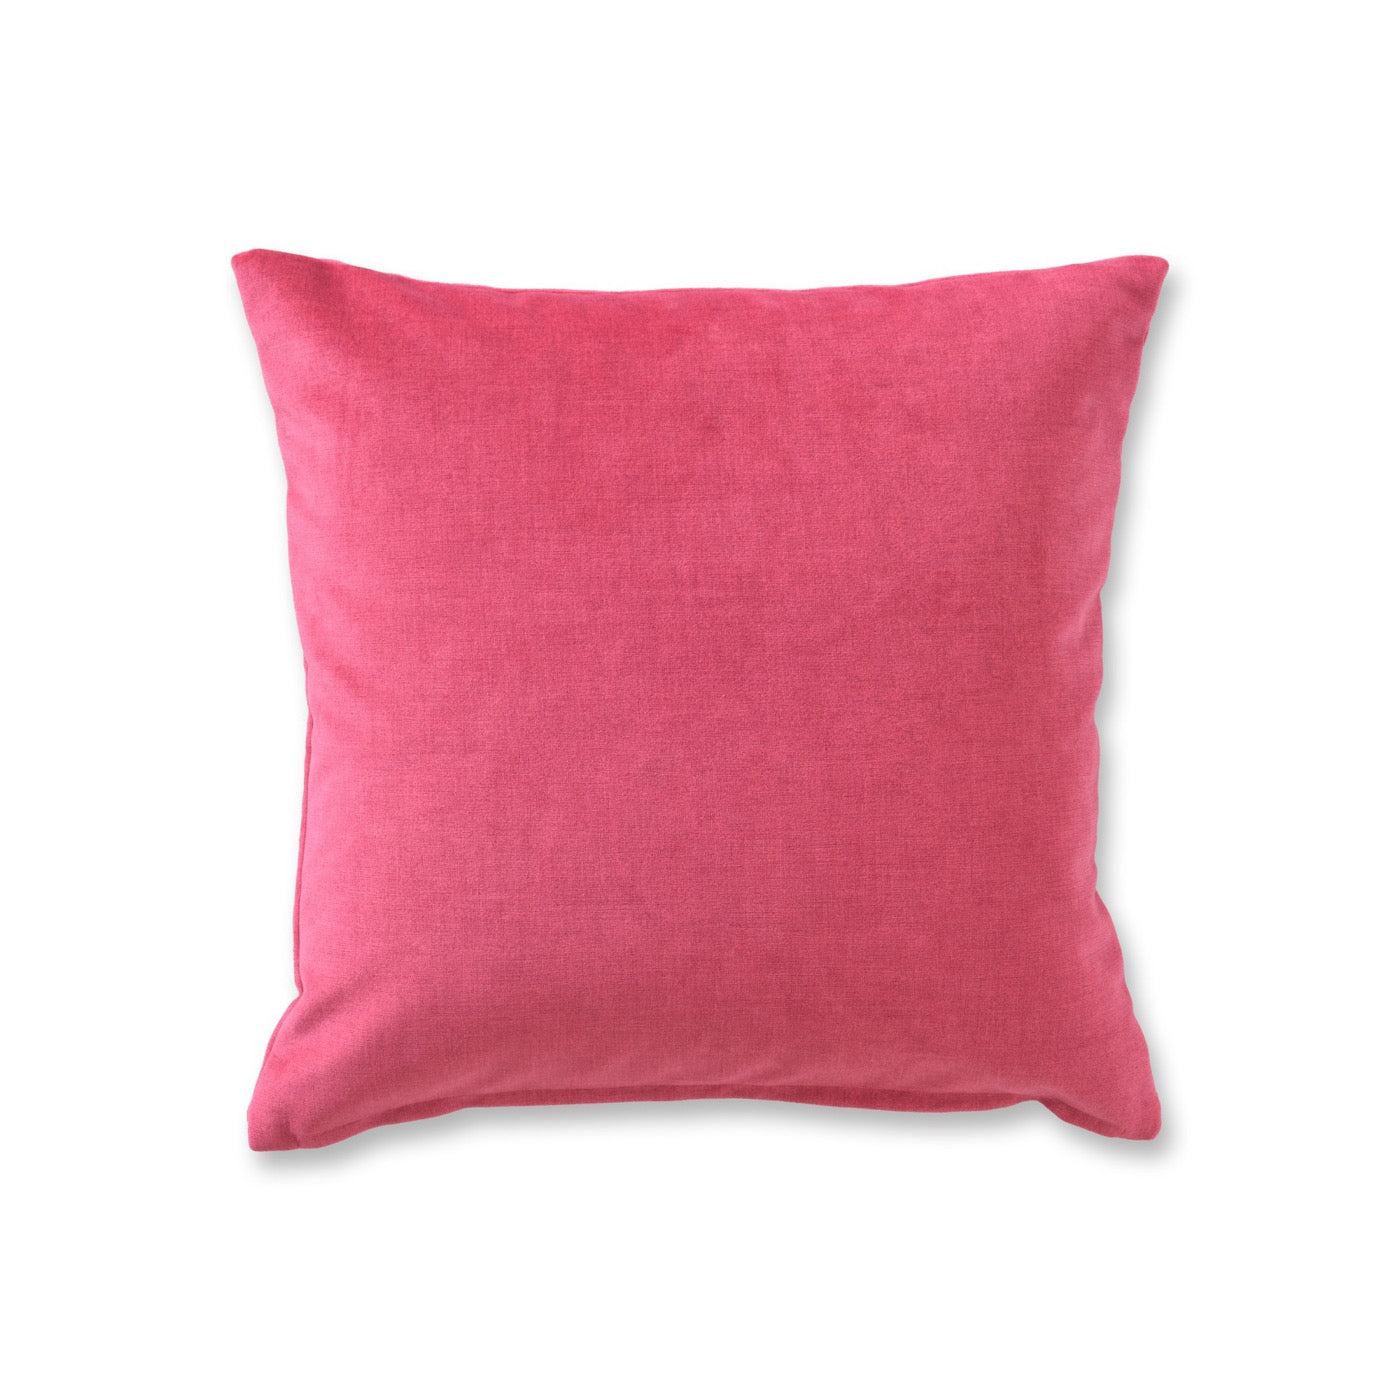 CUSHION  DELUXE25  450×450mm